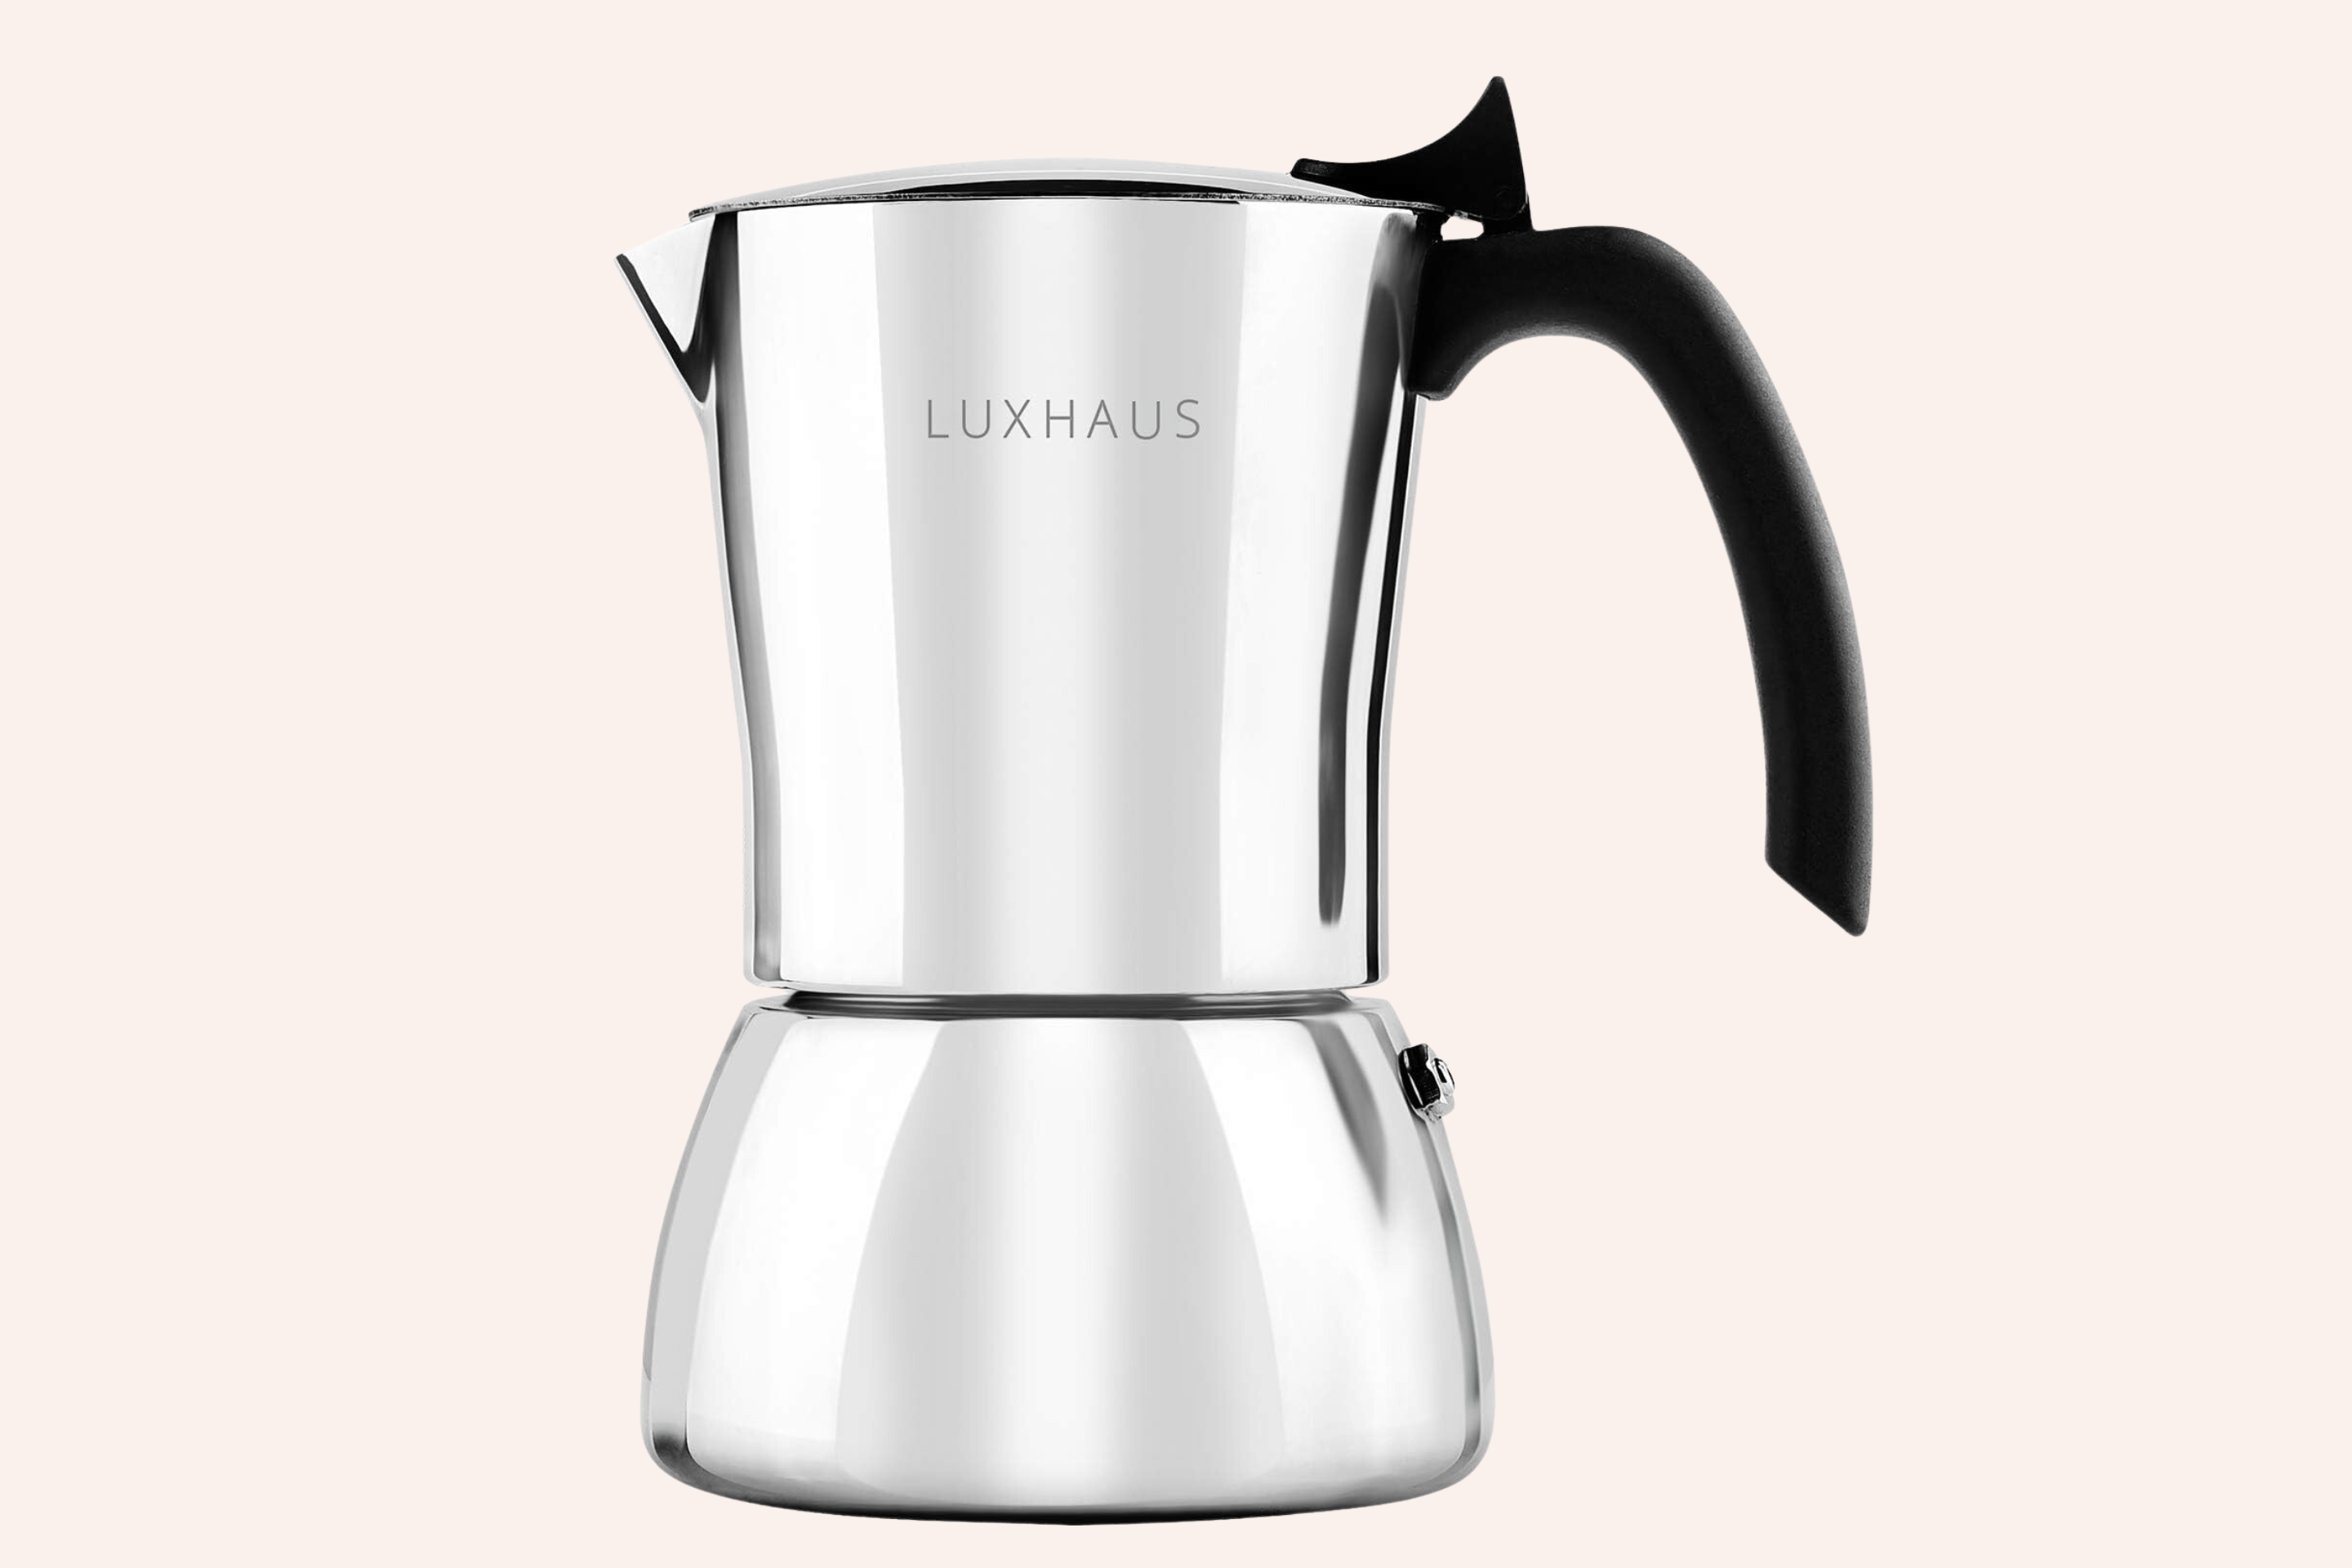 https://img.money.com/2022/11/shopping-luxhaus-coffee-maker.png